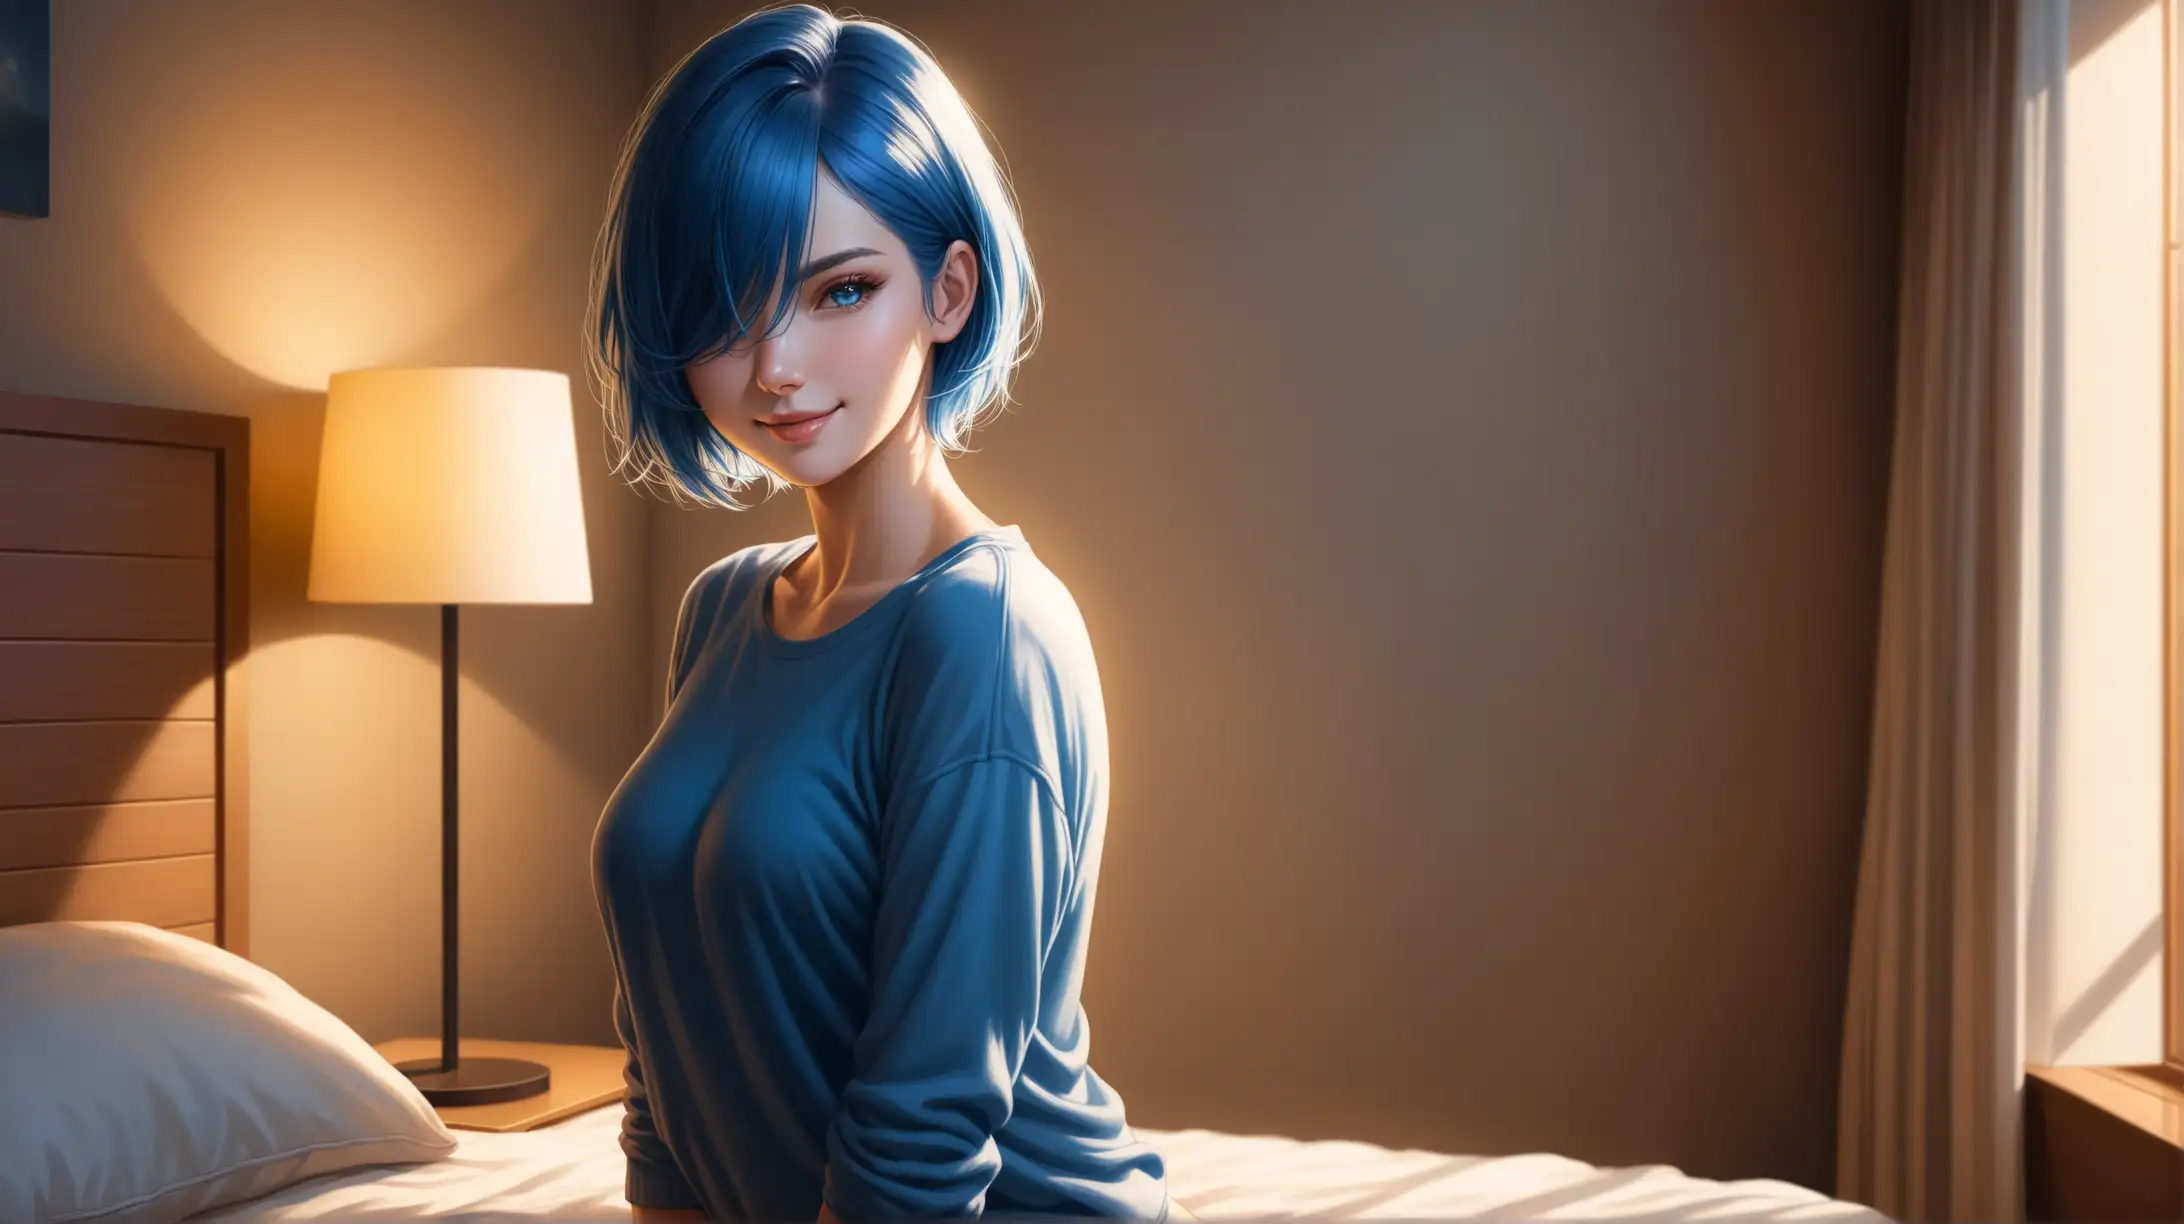 Draw a woman, short blue hair covering one eye, blue eyes, slender figure, high quality, realistic, accurate, detailed, long shot, ambient lighting, indoors, bedroom, casual outfit, seductive pose, smiling at the viewer